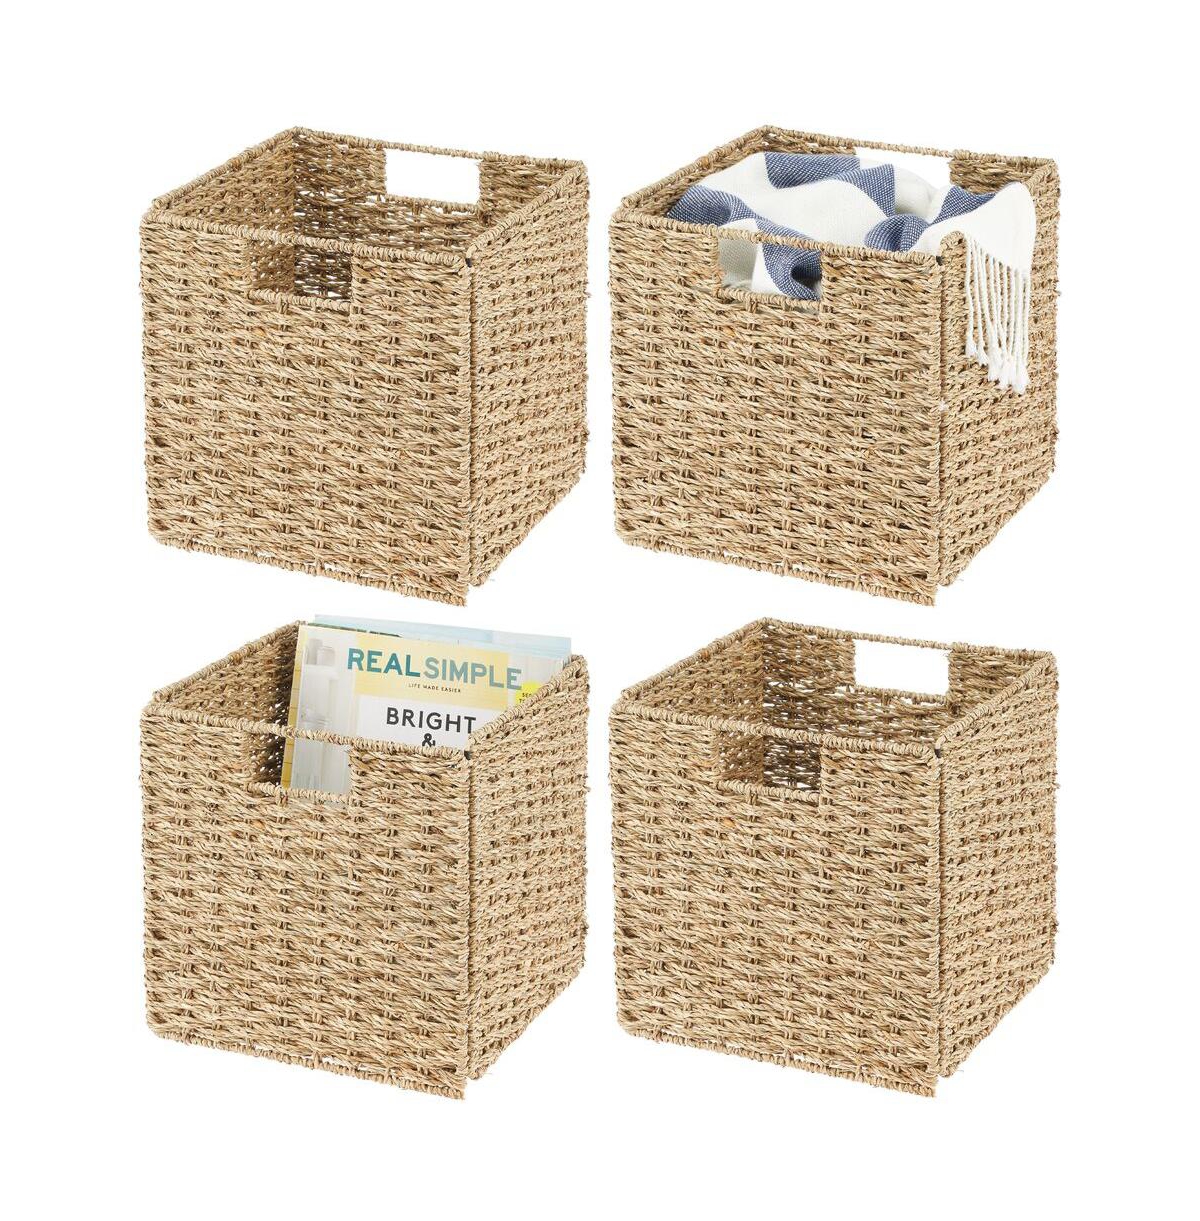 Woven Seagrass Home Storage Basket for Cube Furniture - 4 Pack - Natural